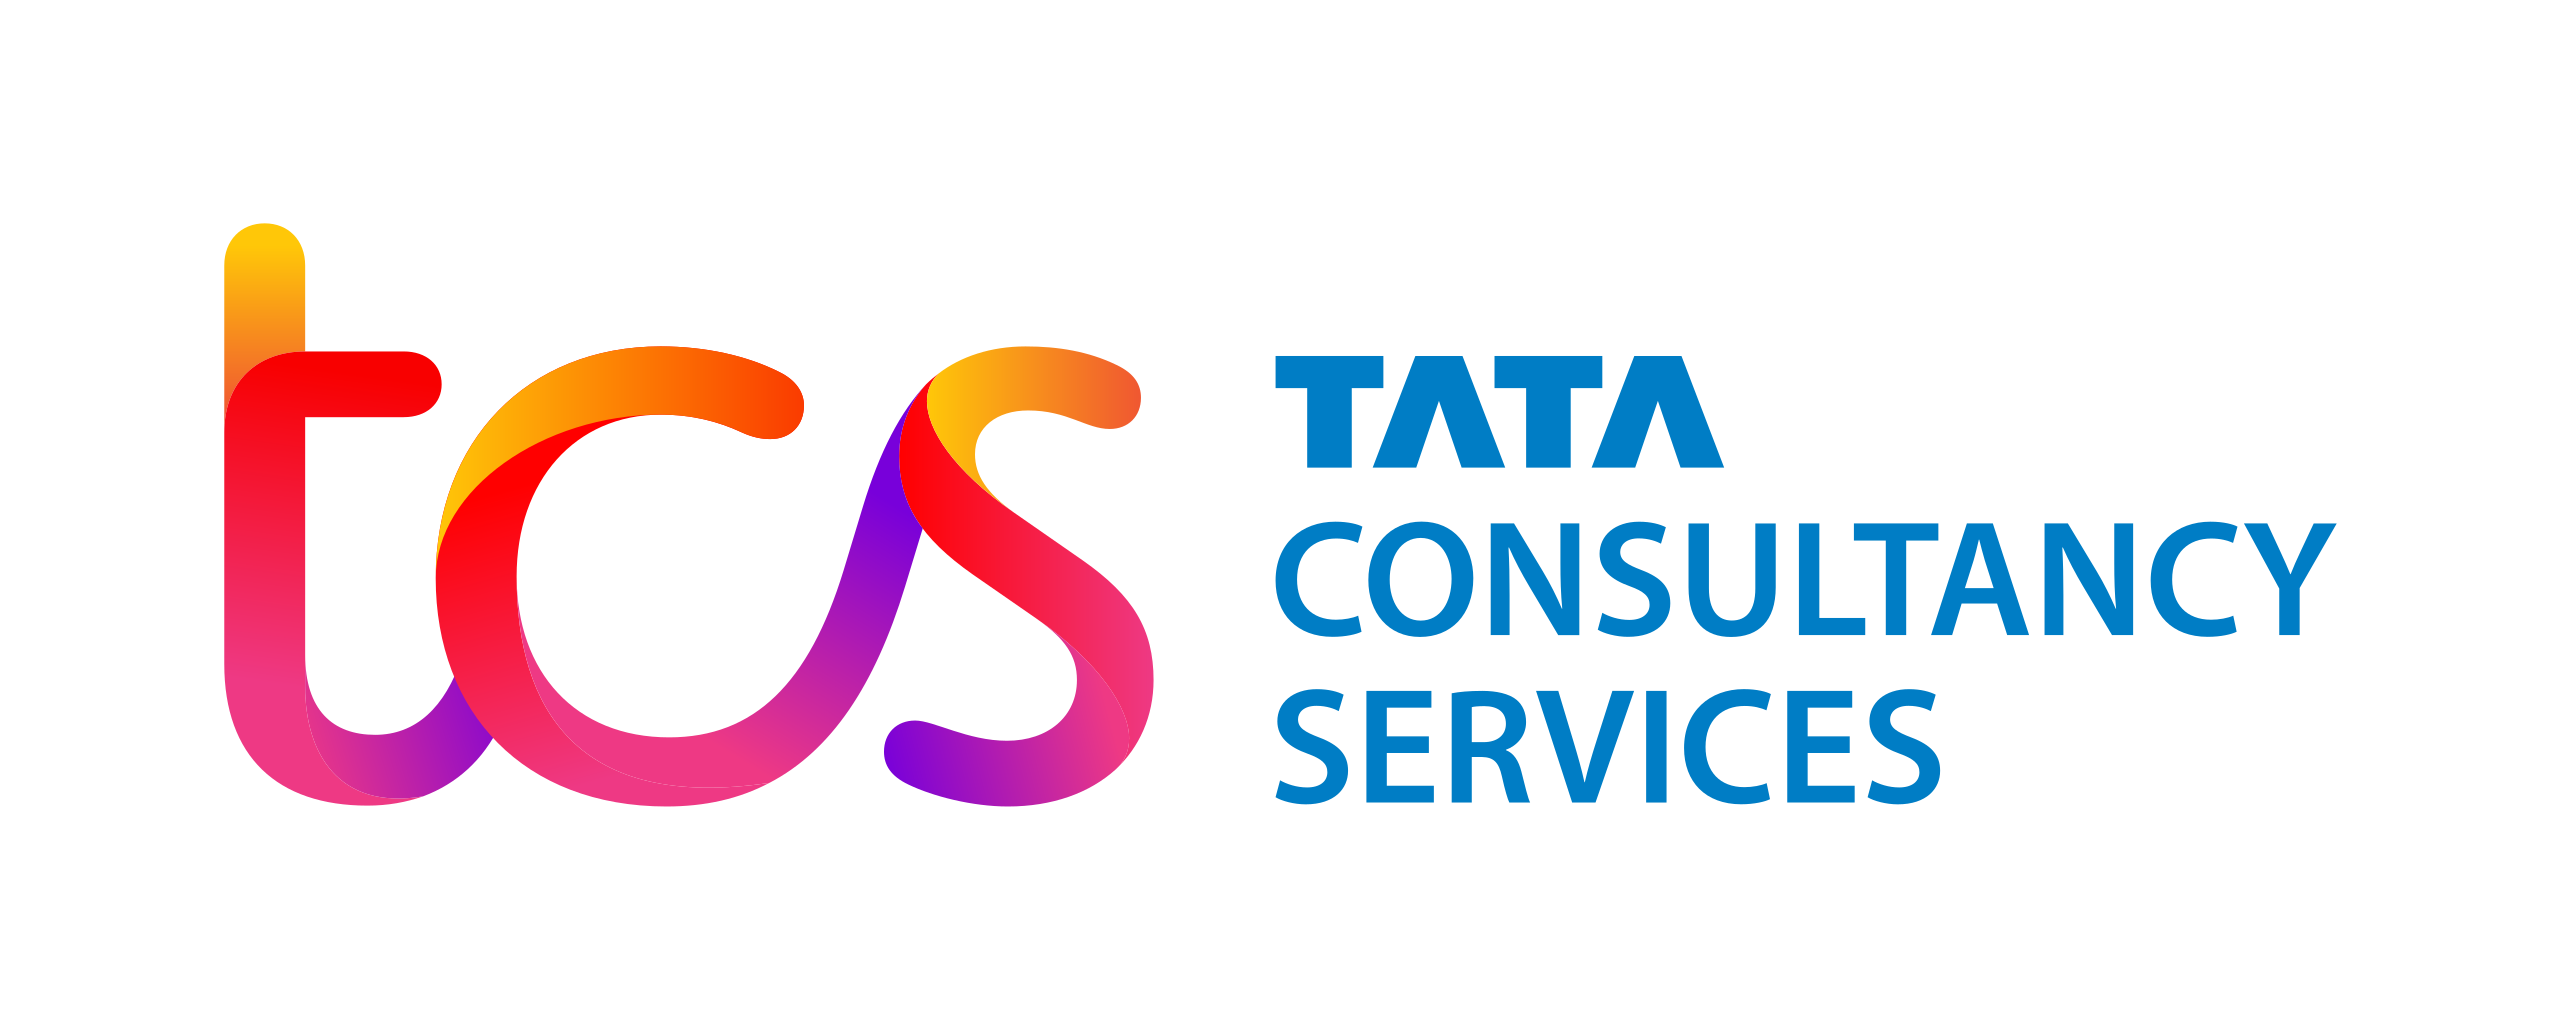 tcs TATA CONSULTANCY SERVICES